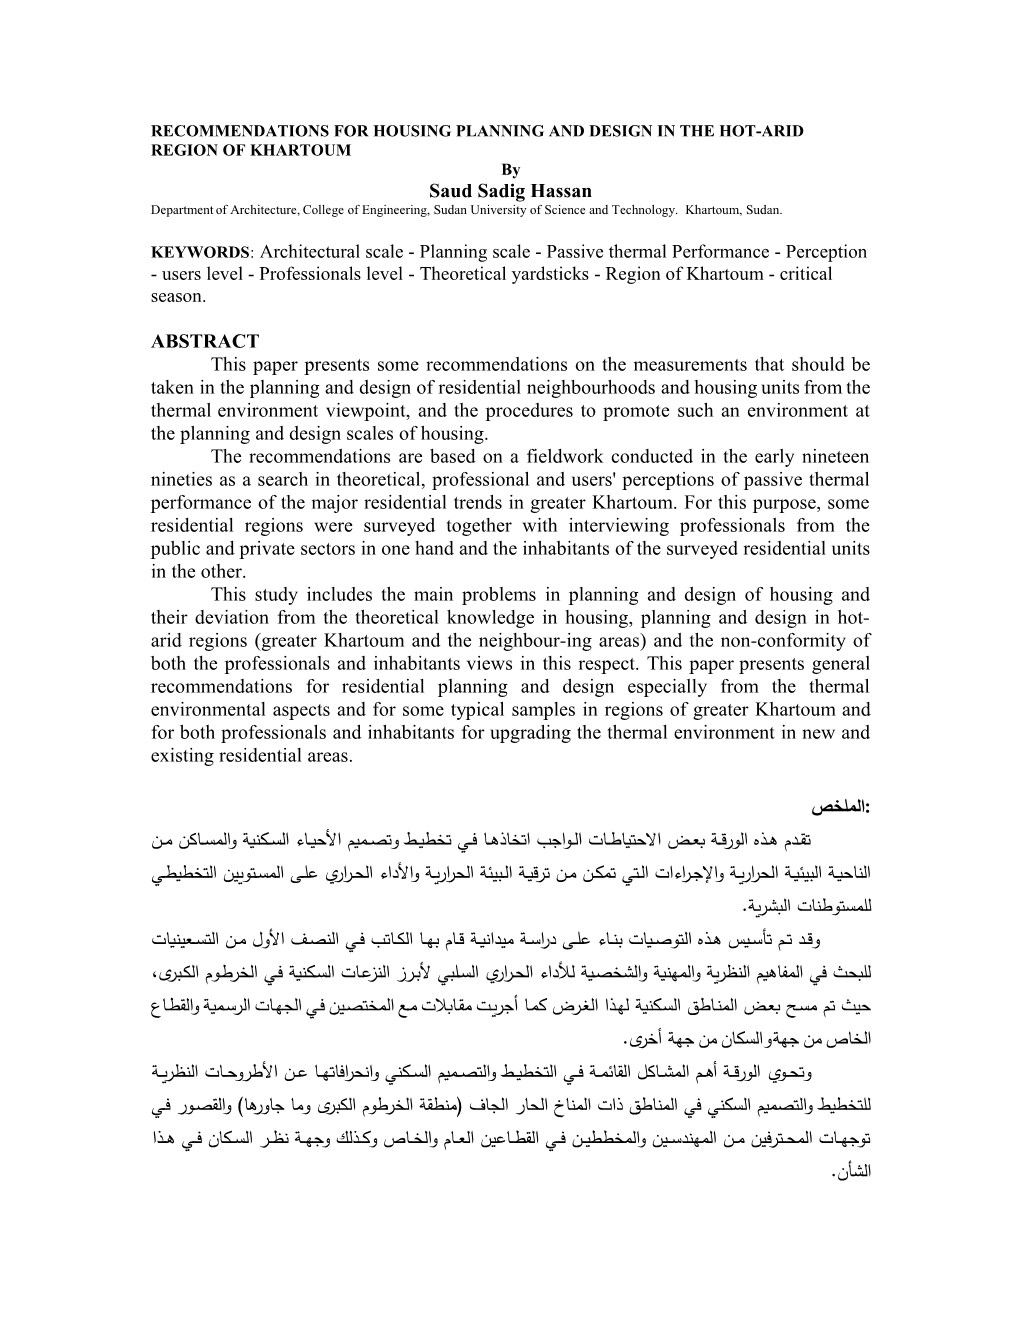 Recommendations for Housing Planning and Design in the Hot-Arid Region of Khartoum